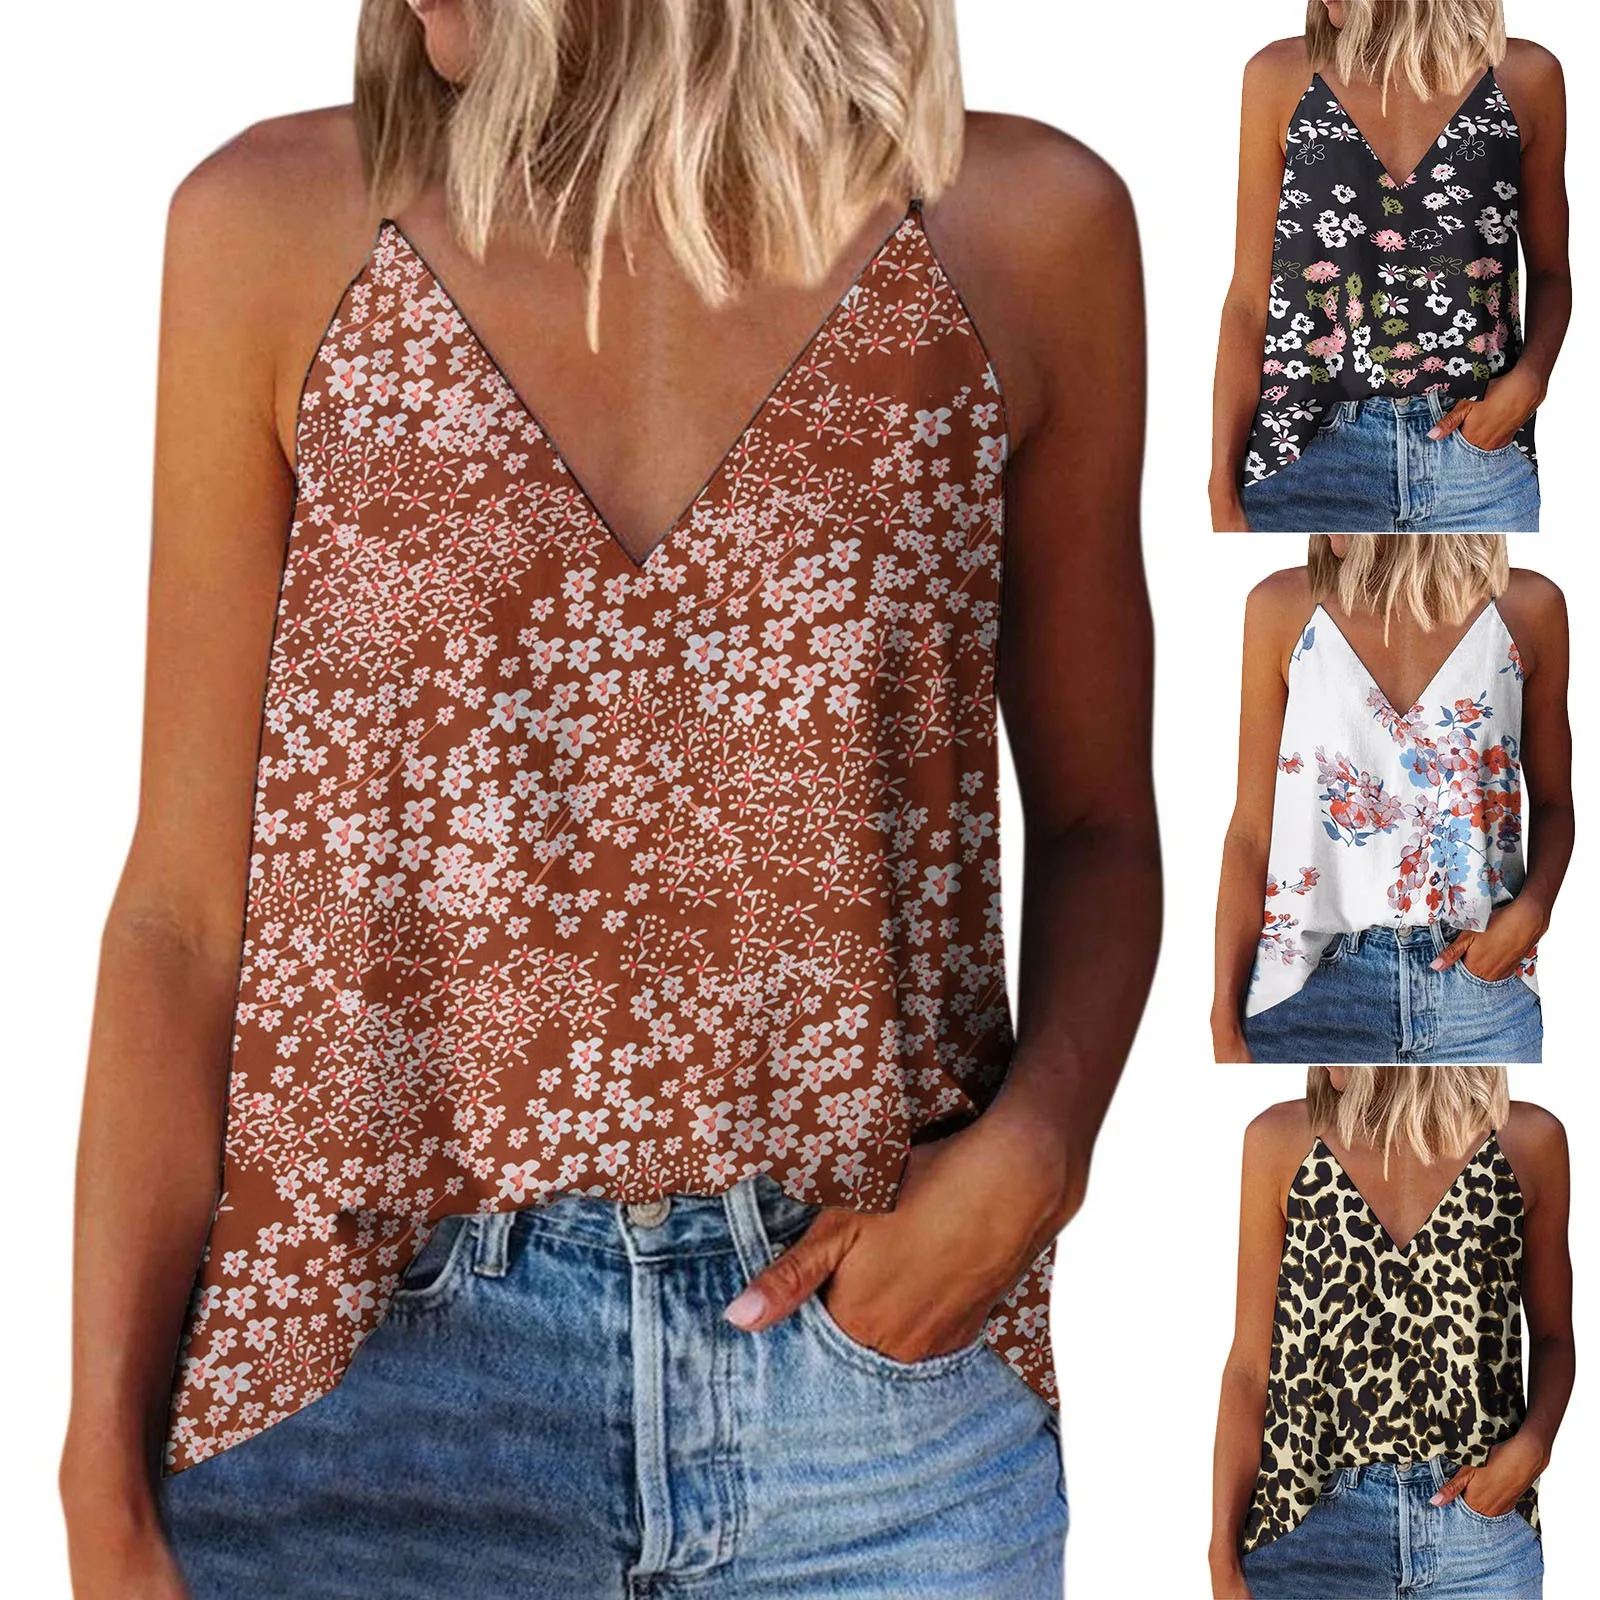 Daisy Top for Women Womens Camisole Print Strappy Vest Top T Shirt Blouse Tank Shirt V Neck Spaghetti Strap 510